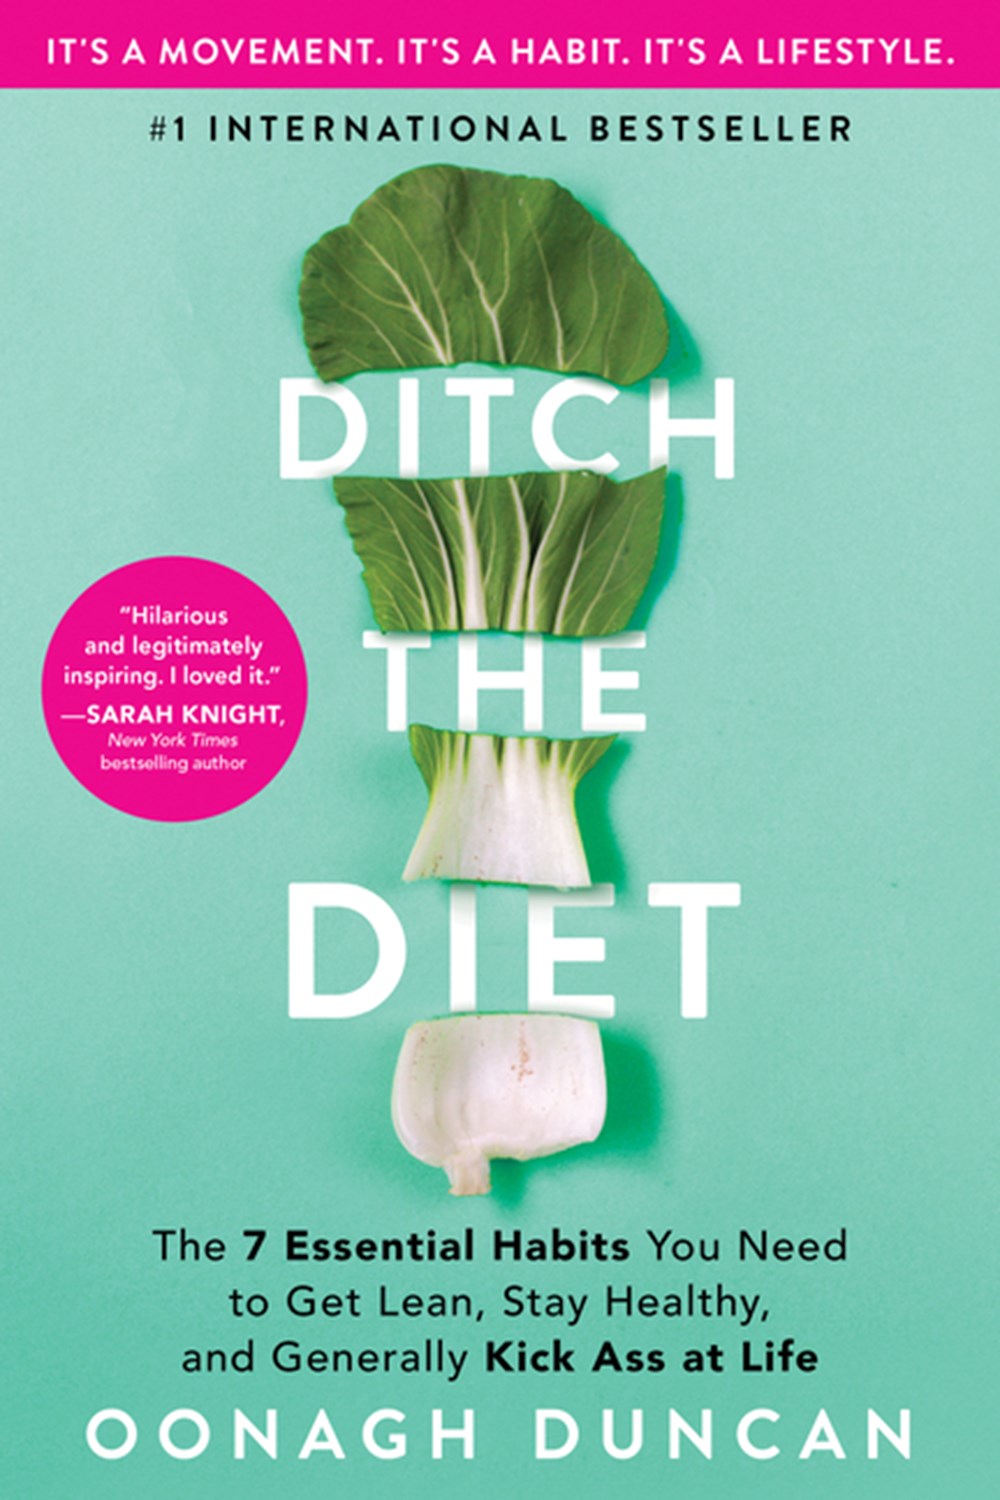 Ditch the Diet: The 7 Essential Habits You Need to Get Lean, Stay Healthy, and Generally Kick Ass at